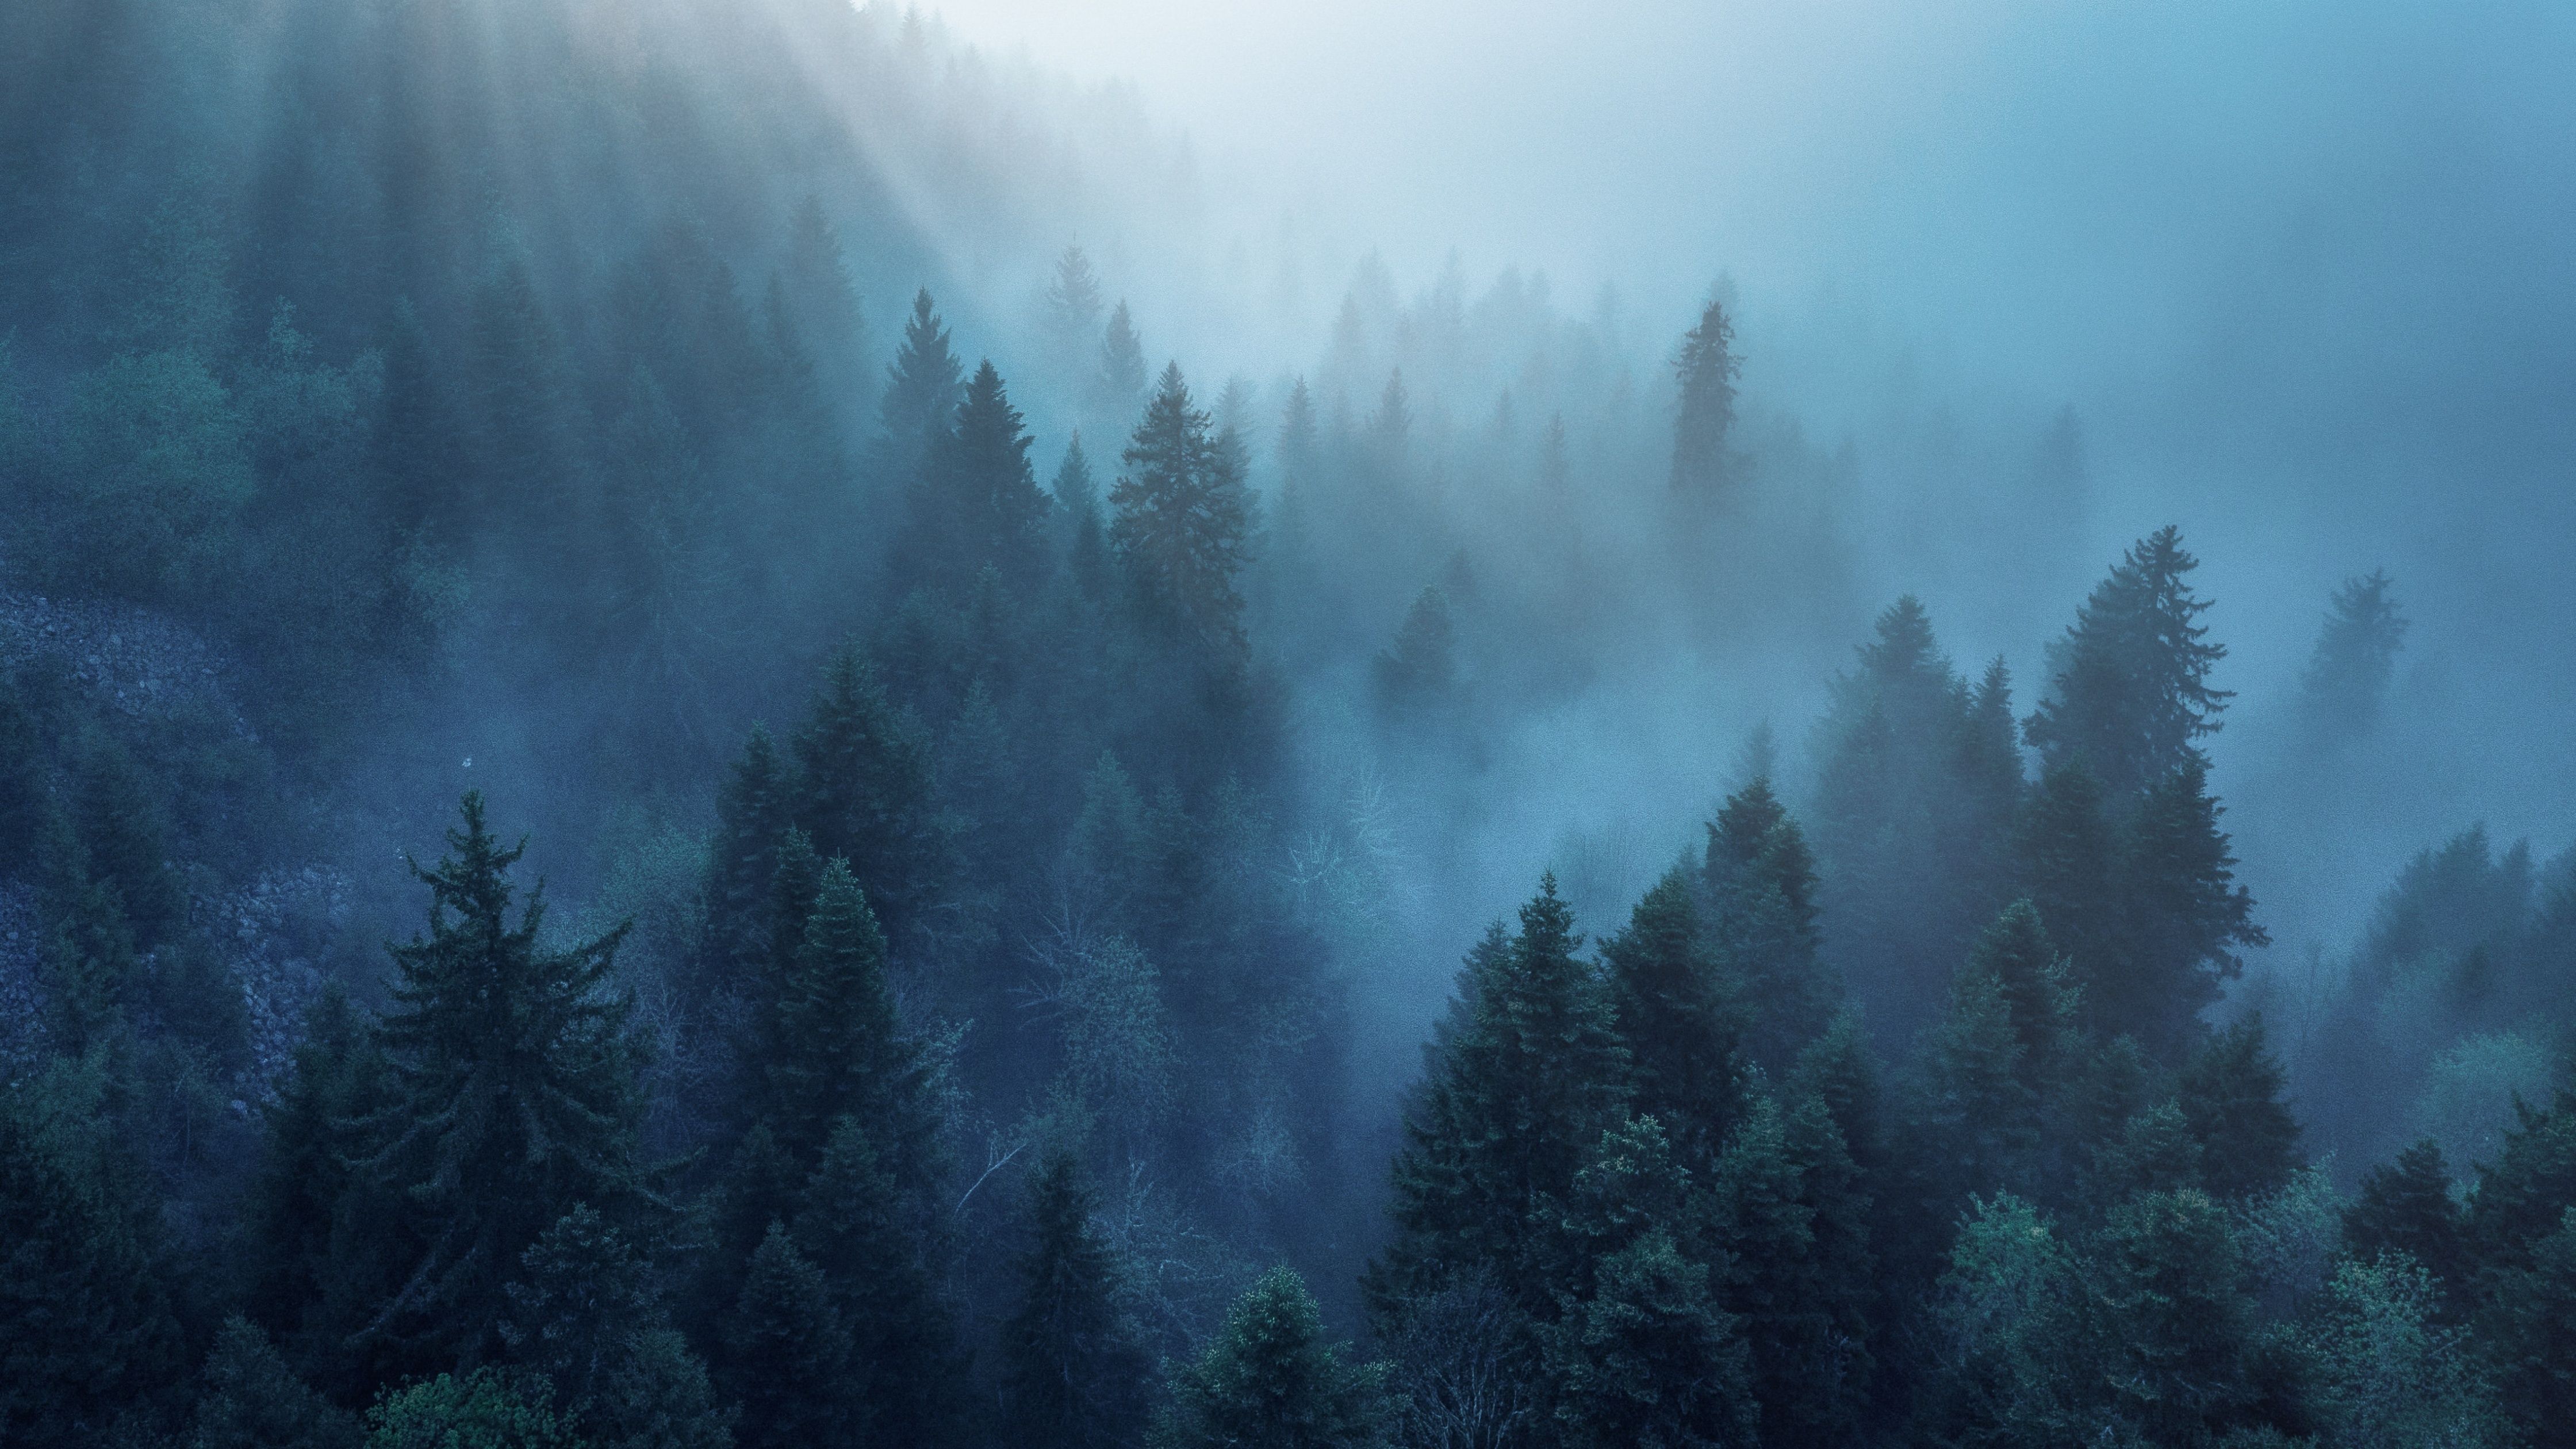 A foggy forest in the mountains. - Foggy forest, forest